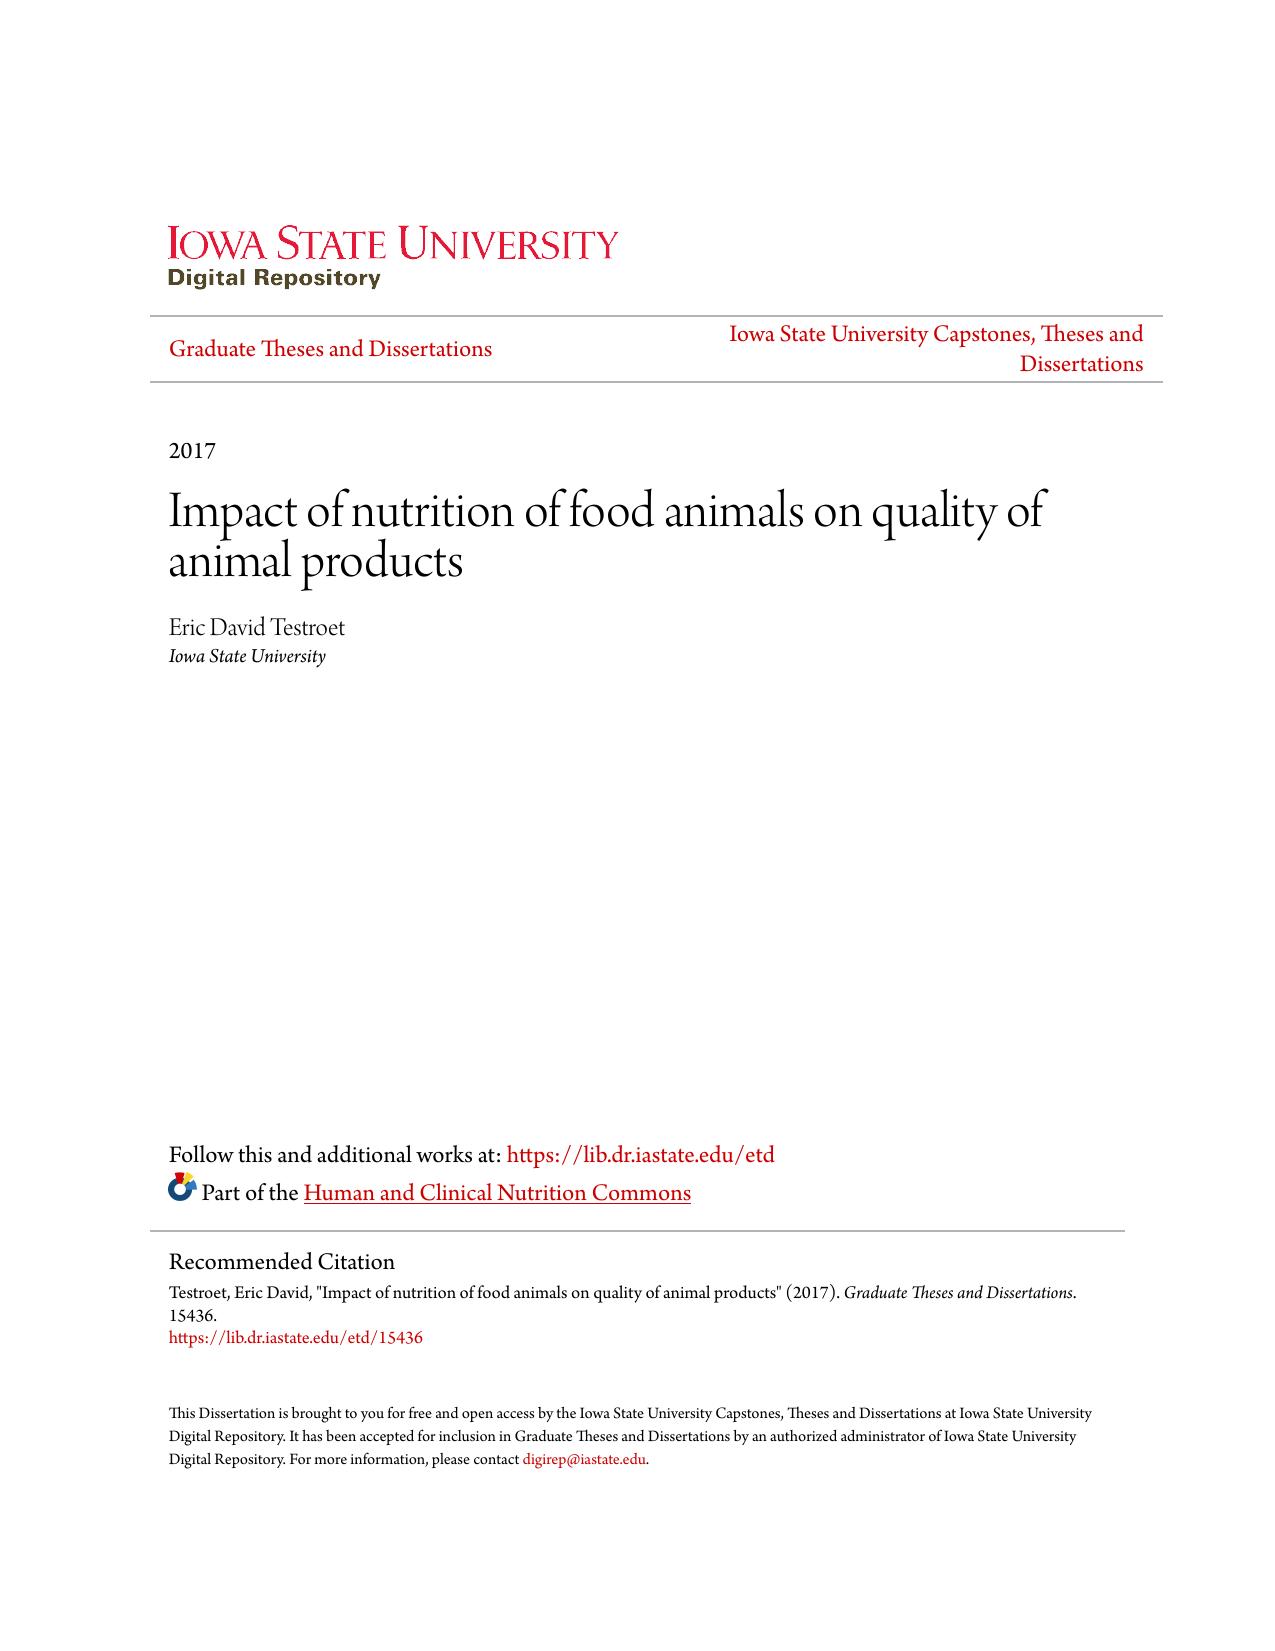 Impact of nutrition of food animals on quality of animal products